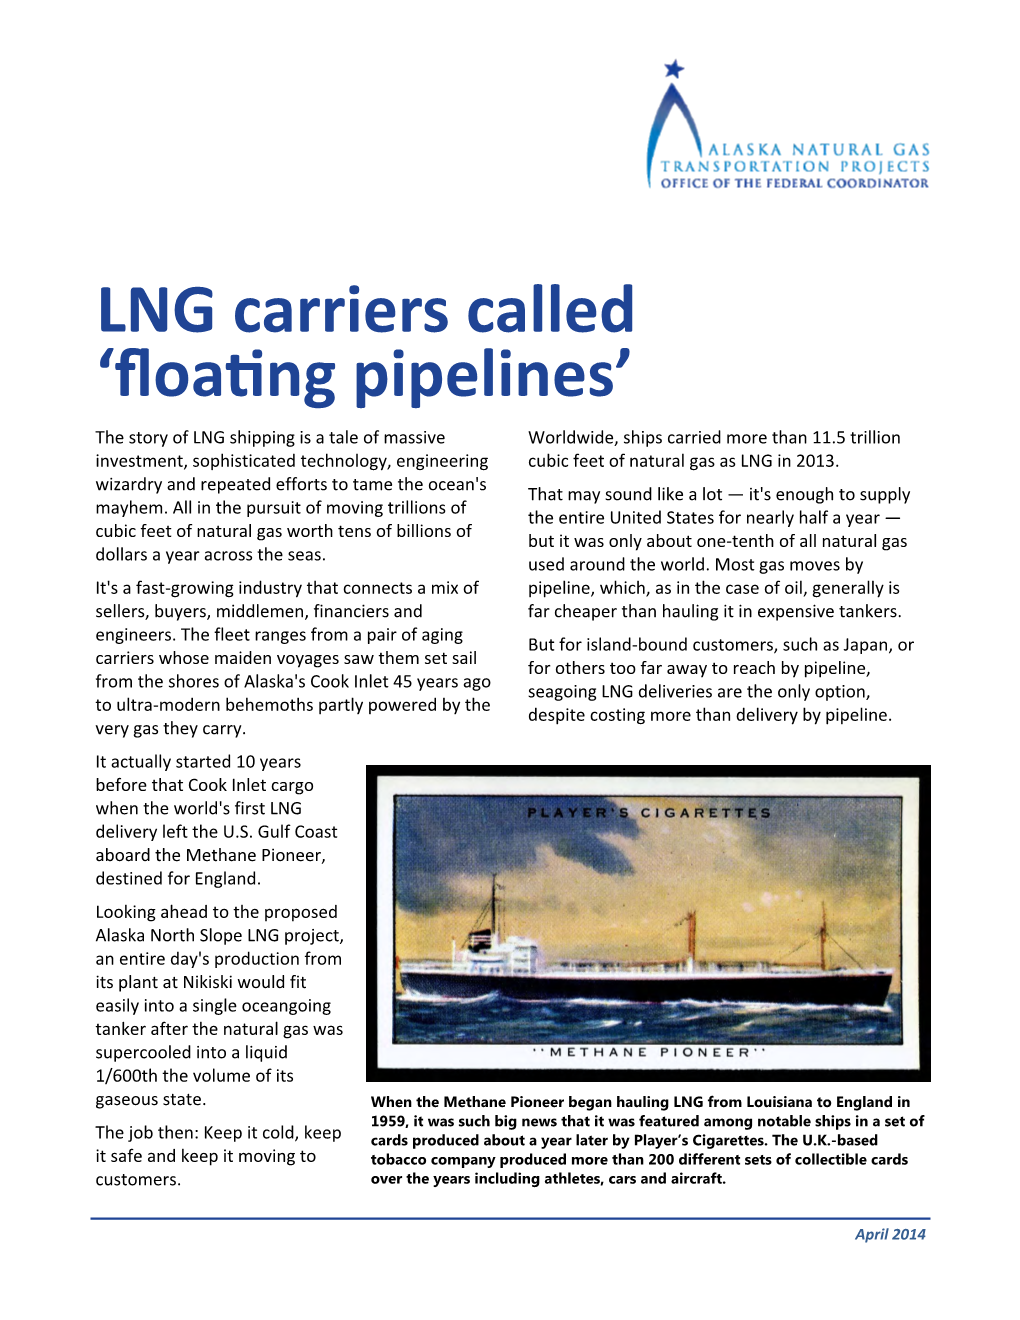 LNG Carriers Called 'Floang Pipelines'